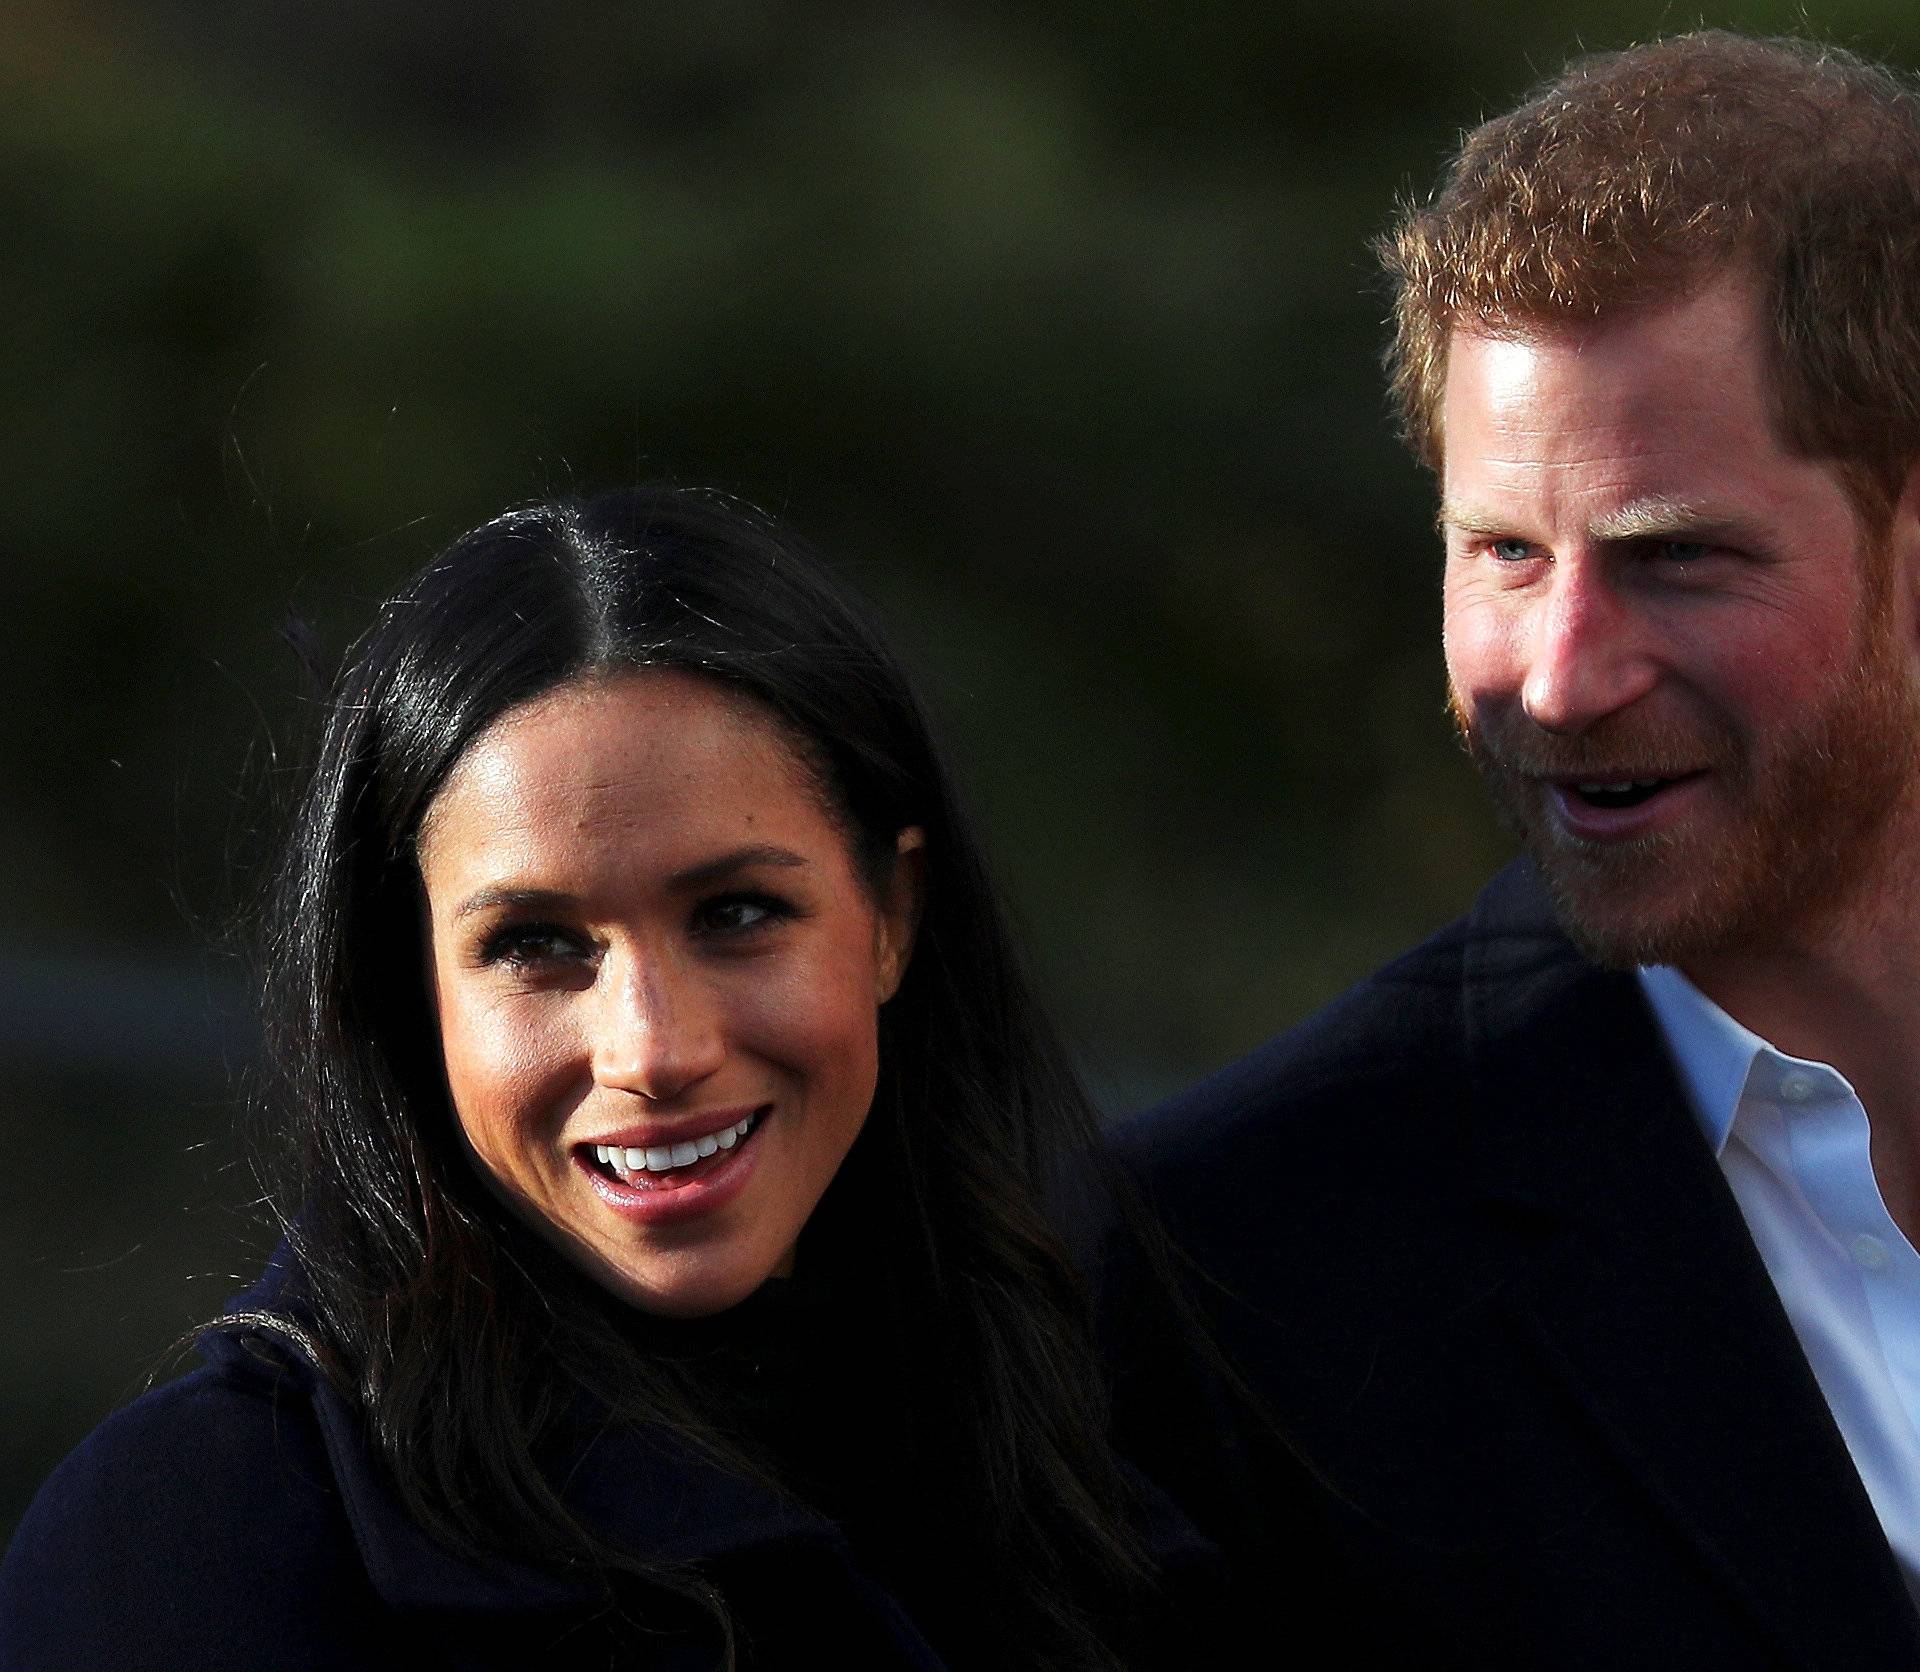 Britain's Prince Harry and his fiancee Meghan Markle visit a school in Nottingham